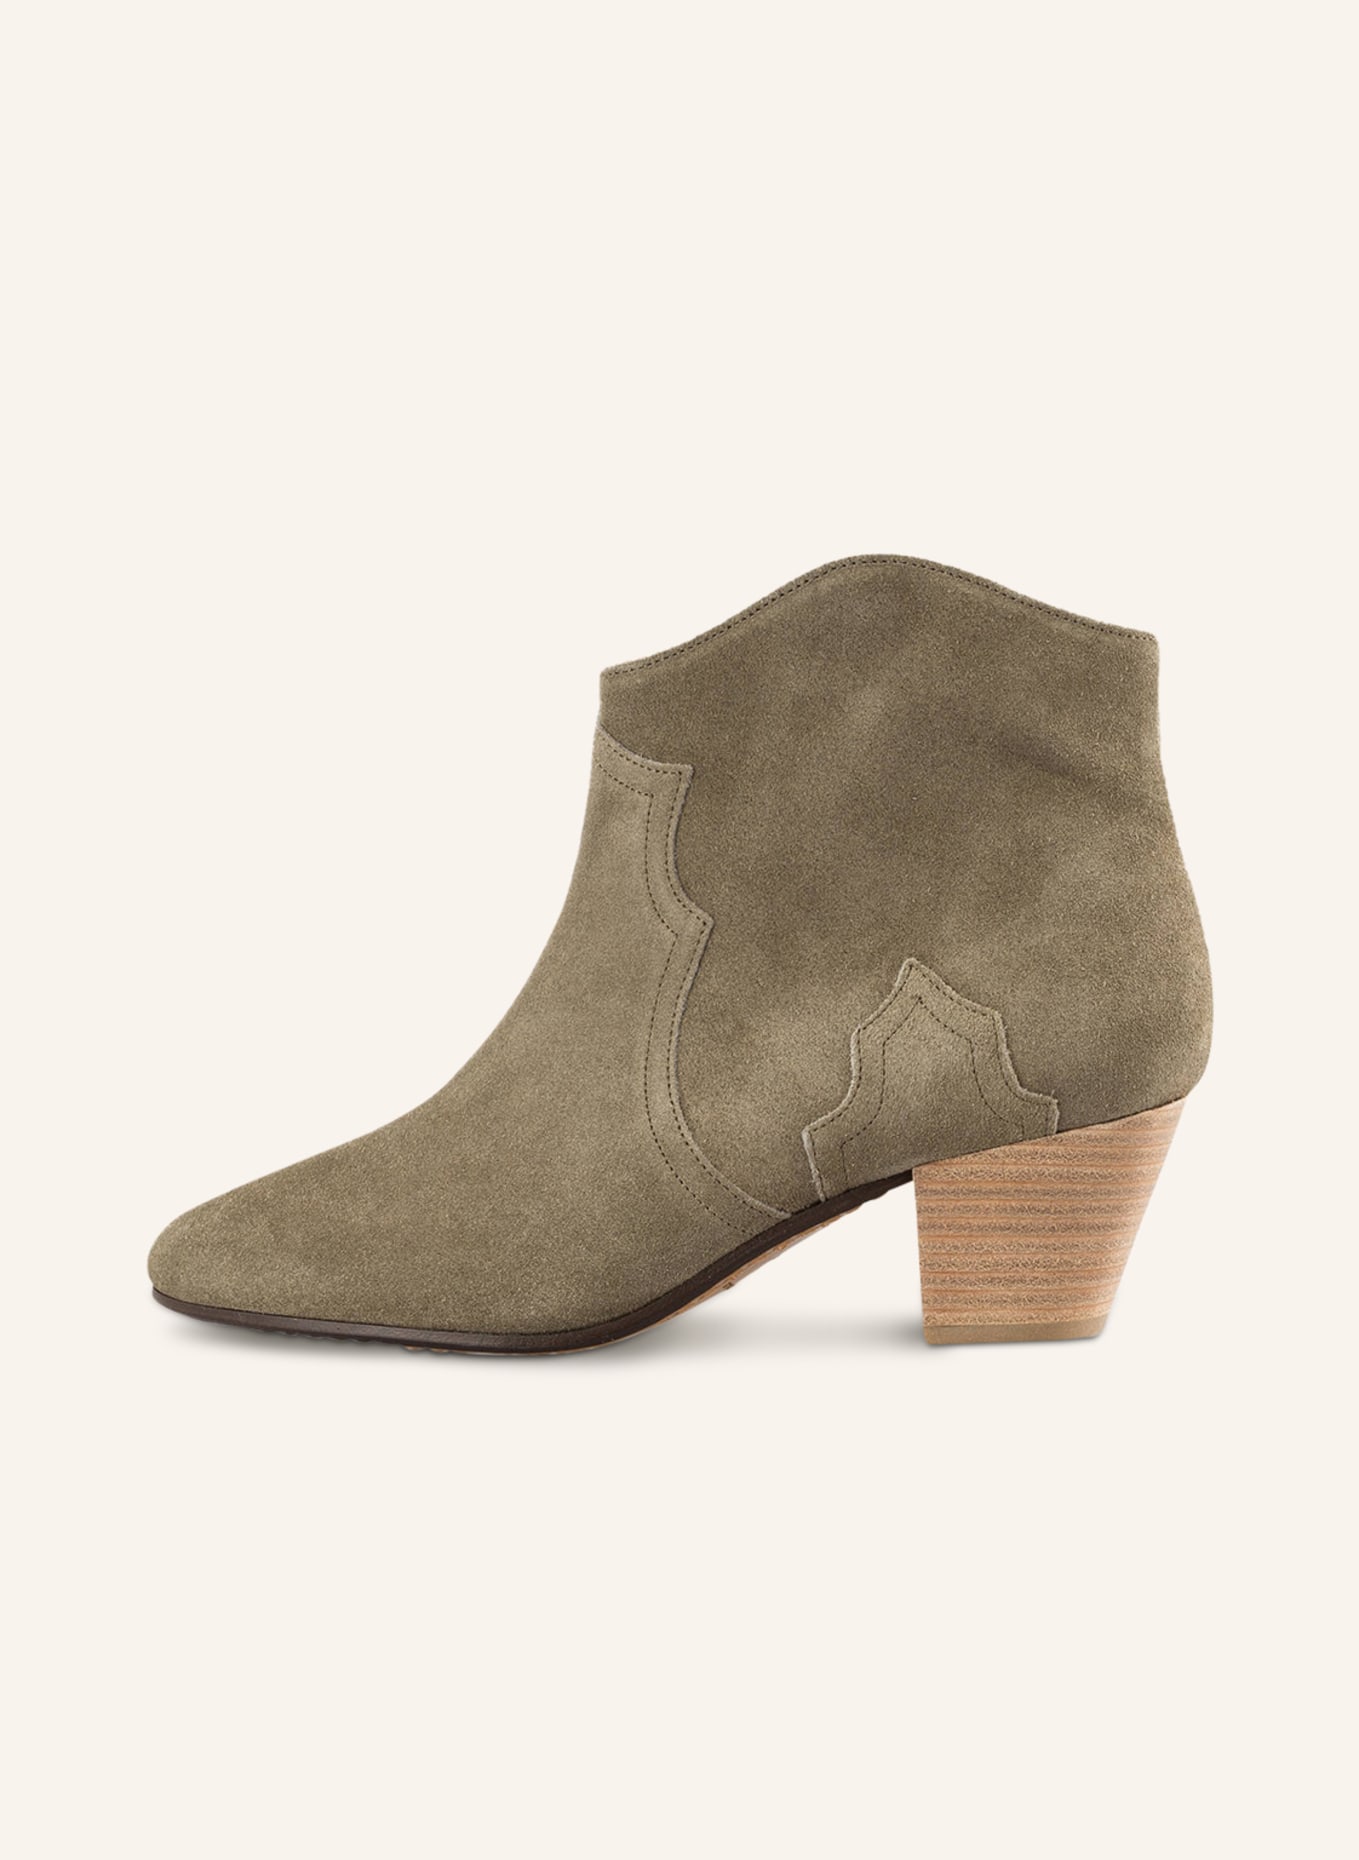 ISABEL MARANT Cowboy Boots DICKER, Farbe: TAUPE (Bild 4)